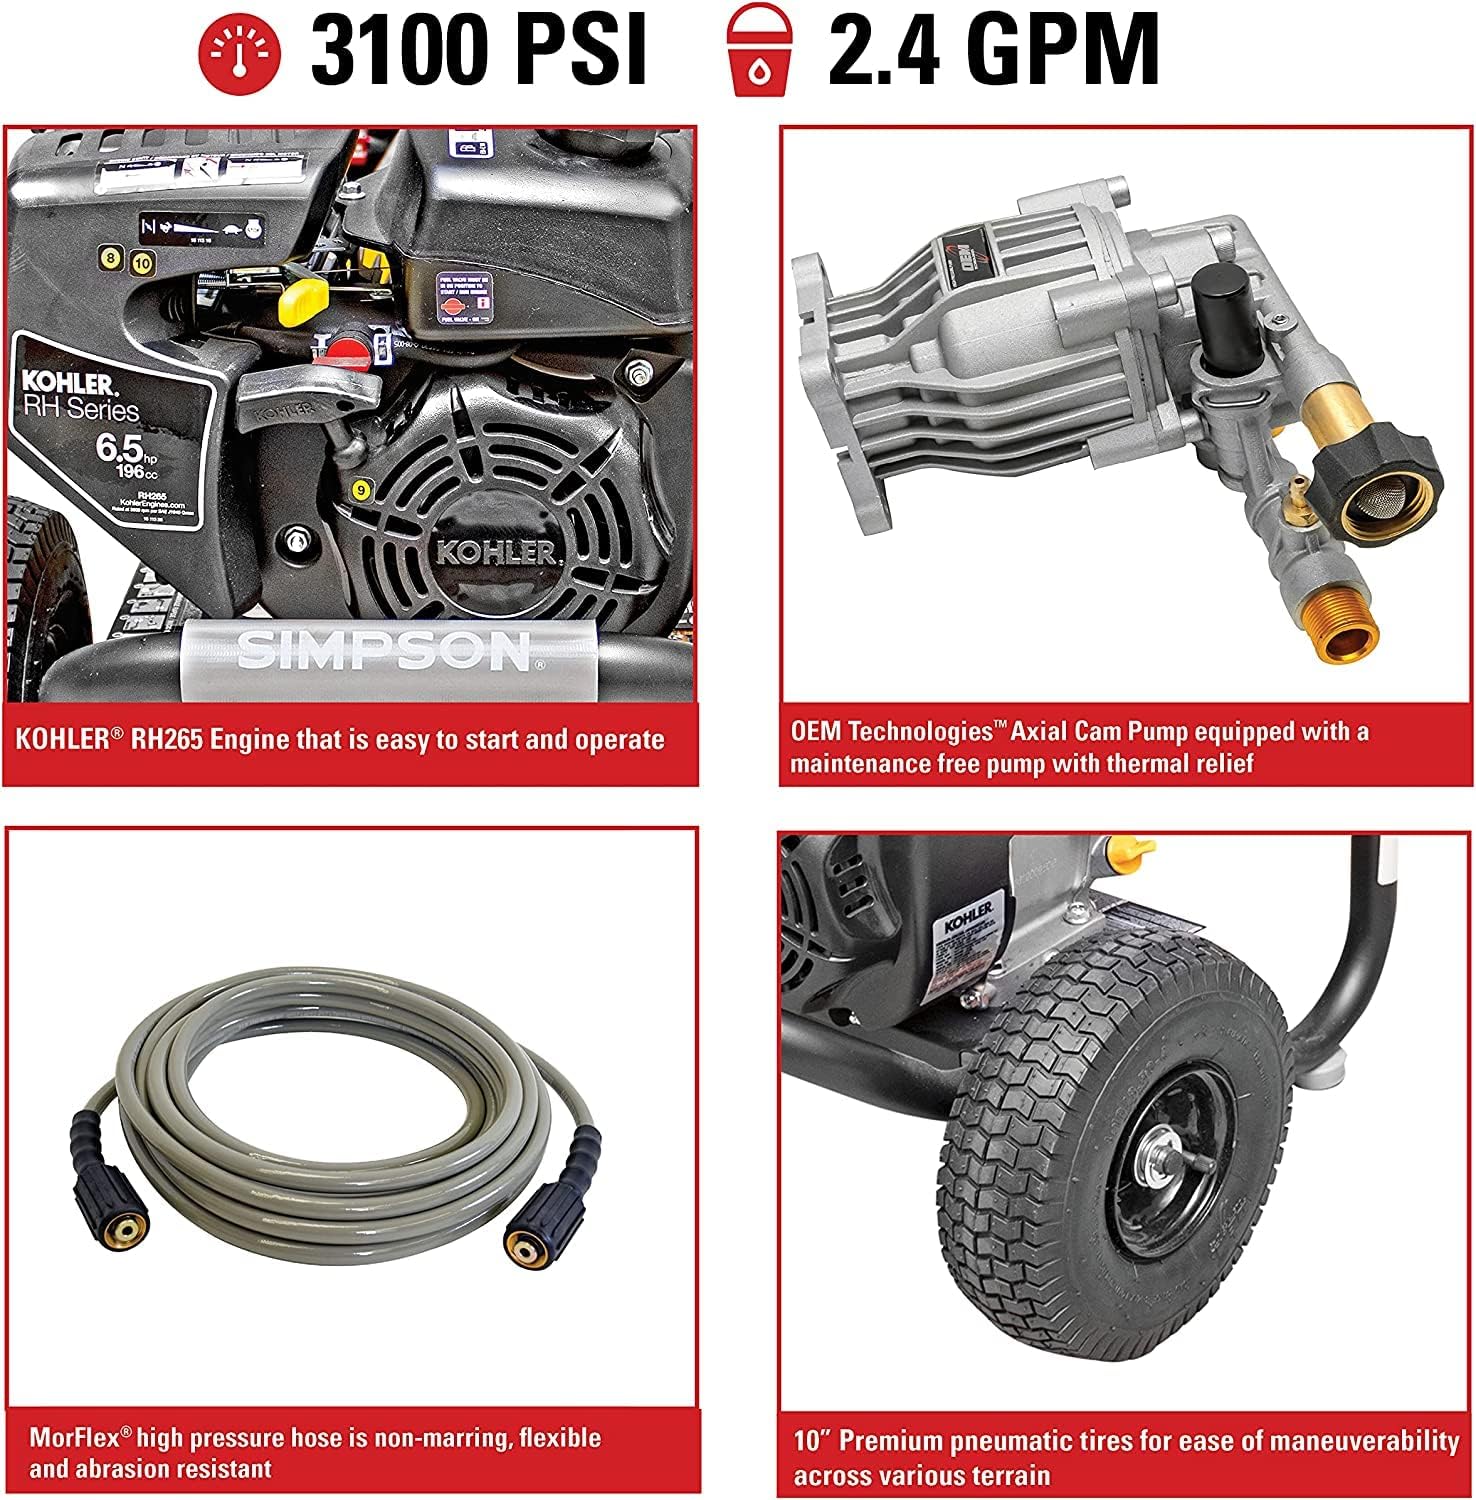 SIMPSON Cleaning MS60763-S MegaShot 3100 PSI Gas Pressure Washer, 2.4 GPM, Kohler RH265 Engine, Includes Spray Gun and Extension Wand, 5 QC Nozzle Tips, 1/4-in. x 25-ft. MorFlex Hose Pressure Washer 3100 PSI Honda RH265